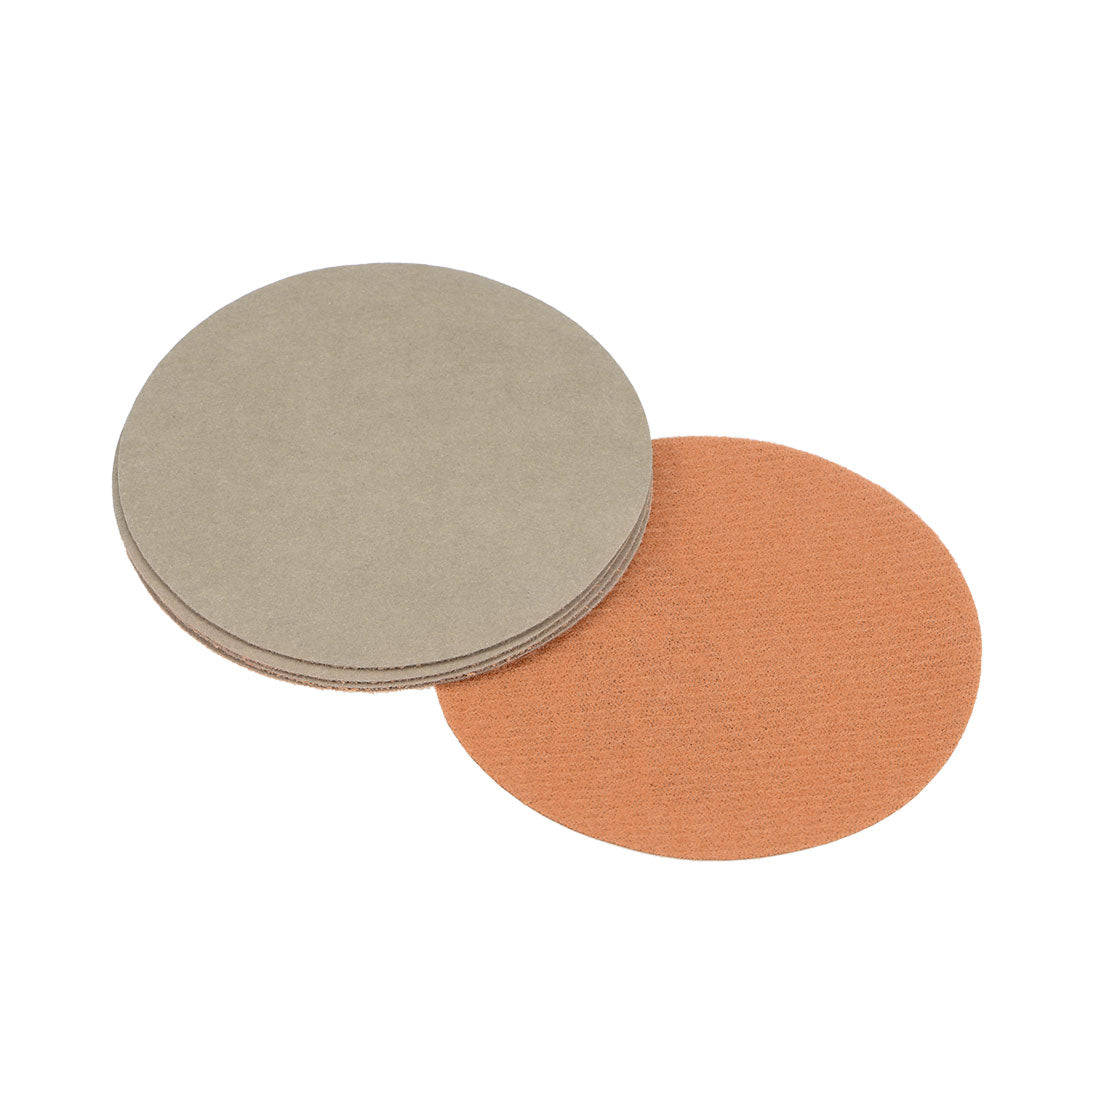 Uxcell Uxcell 3 inch Wet Dry Disc 10000 Grit Hook and Loop Sanding Disc Silicon Carbide 3pcs